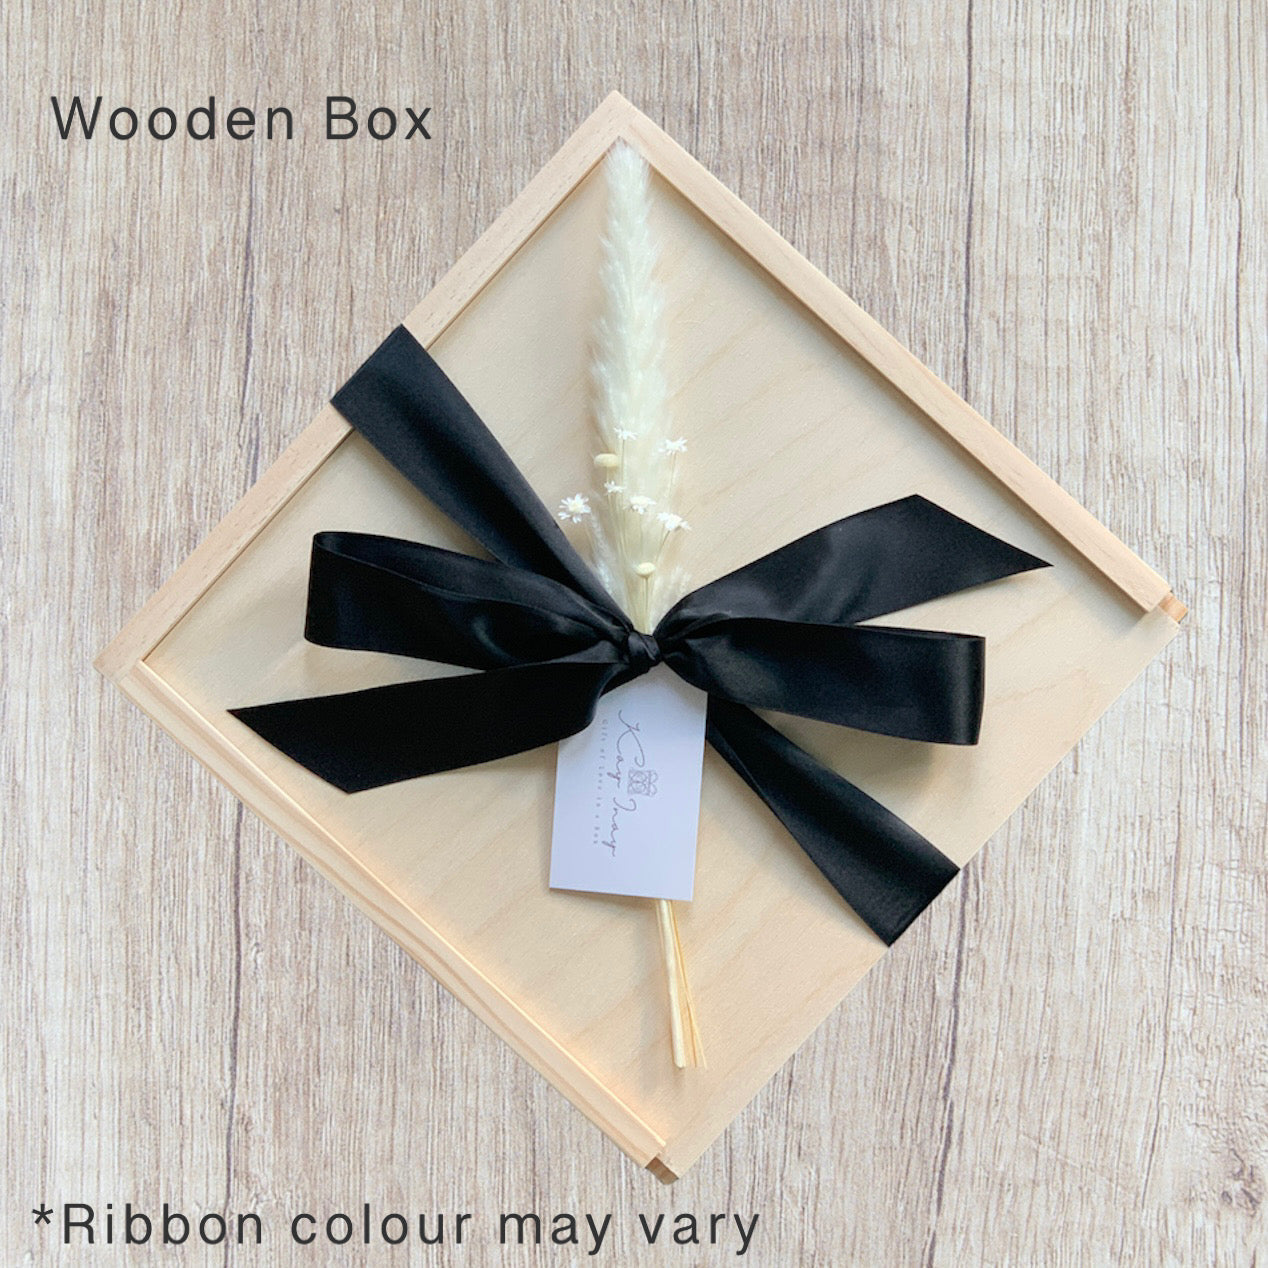 wooden gift box tied with a satin ribbon and dried pampas